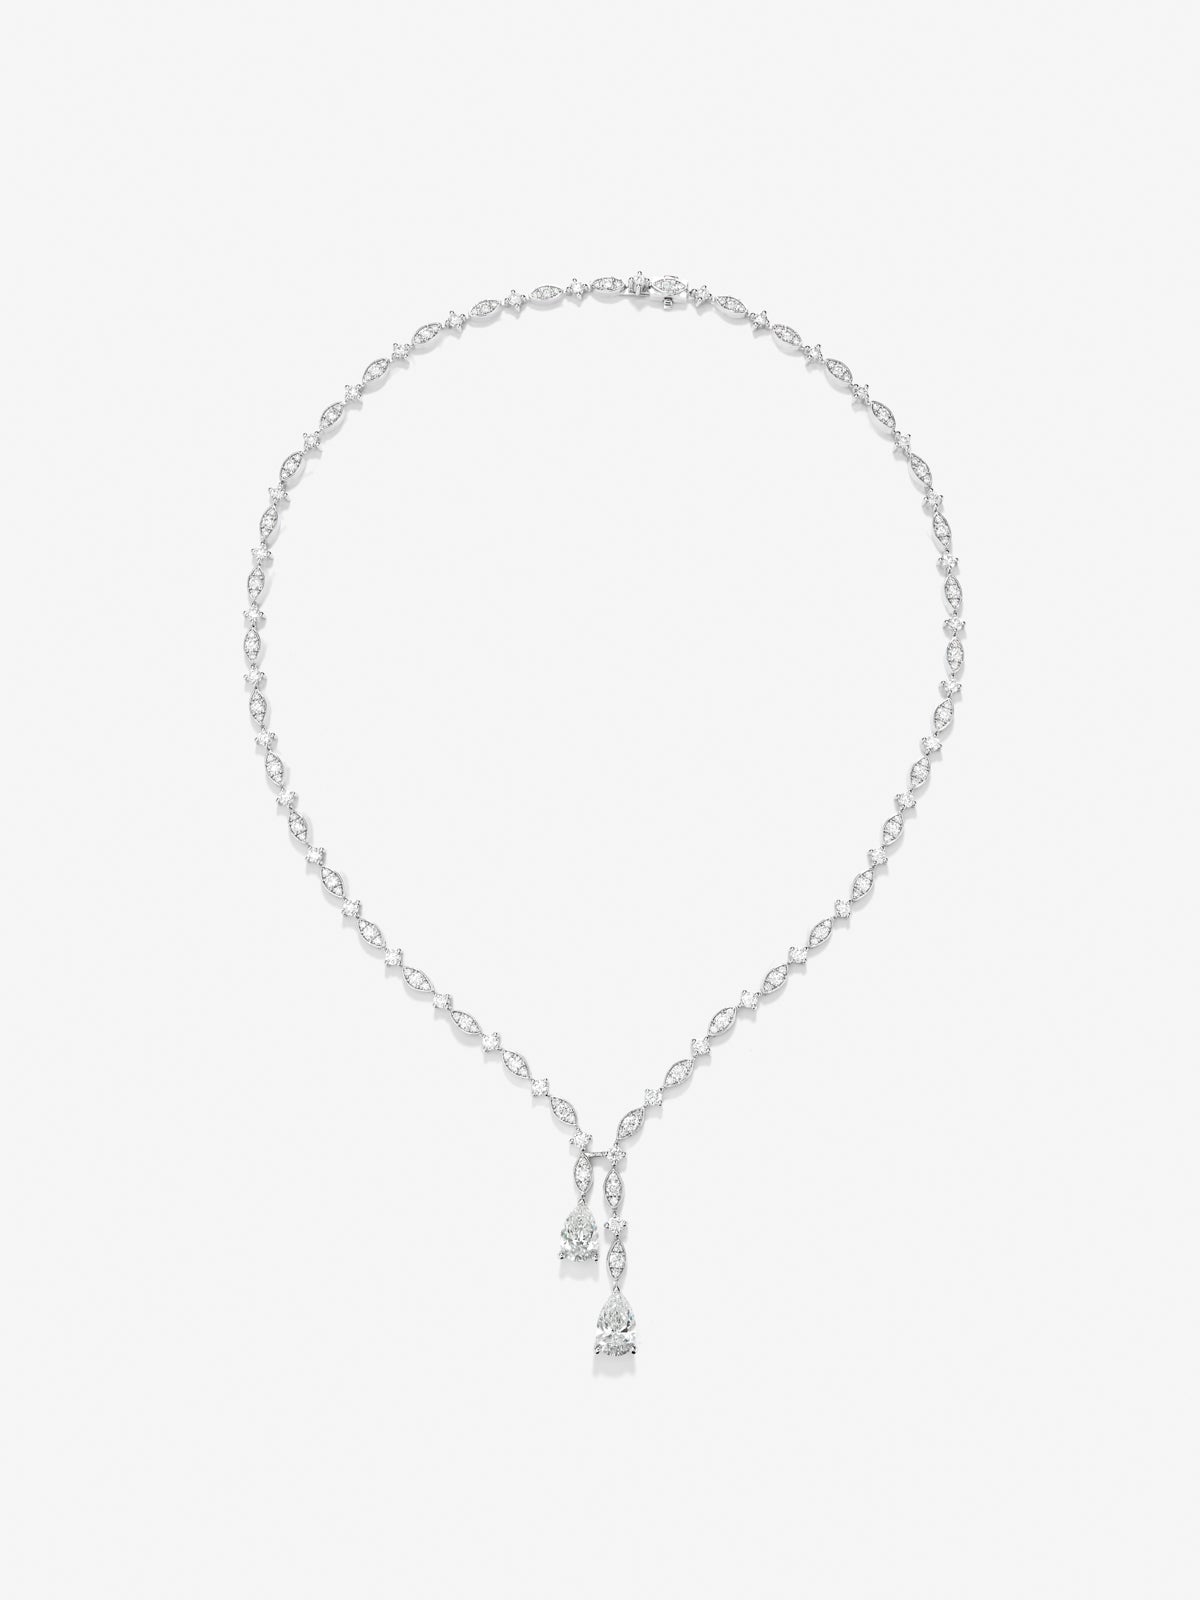 18K white gold necklace with white pear diamonds of 3.51 cts and white diamonds in bright size 6.32cts